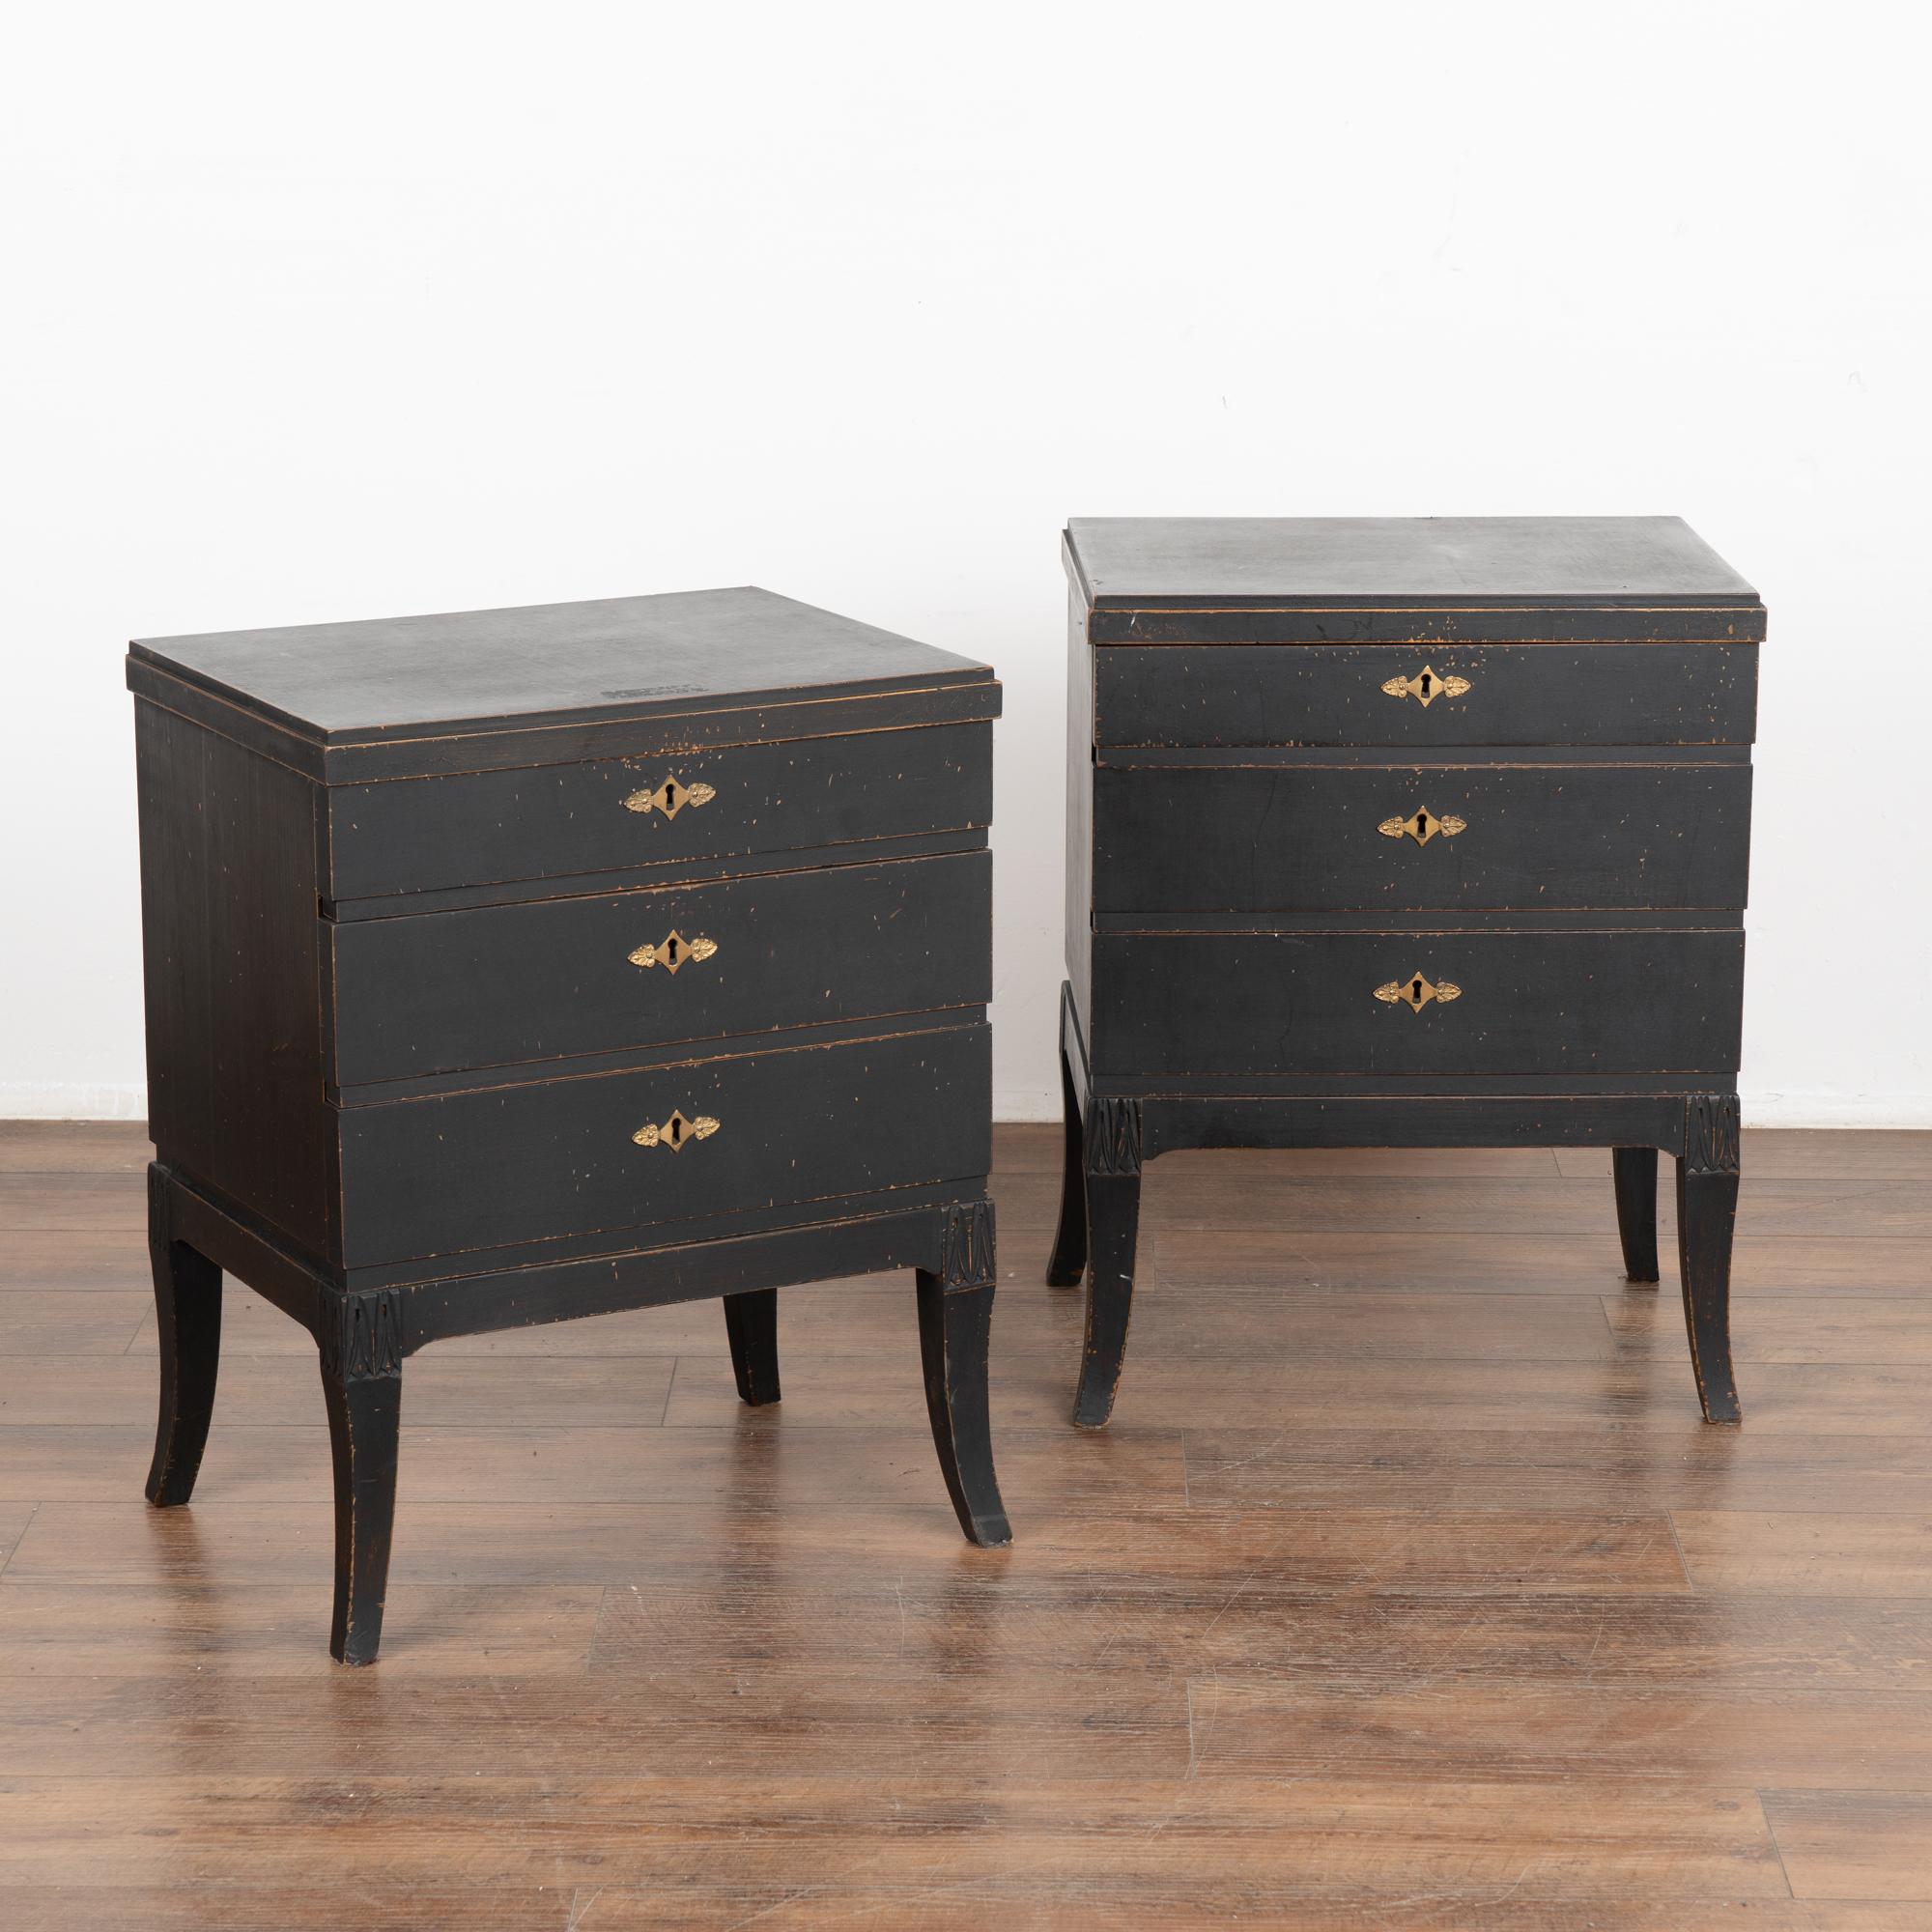 A pair of small Gustavian style pine chest of three drawers with clean tapered lines.
The newer, professionally applied black painted finish is perfectly distressed to fit the age and grace of this refined pair of nightstands. 
Restored and ready